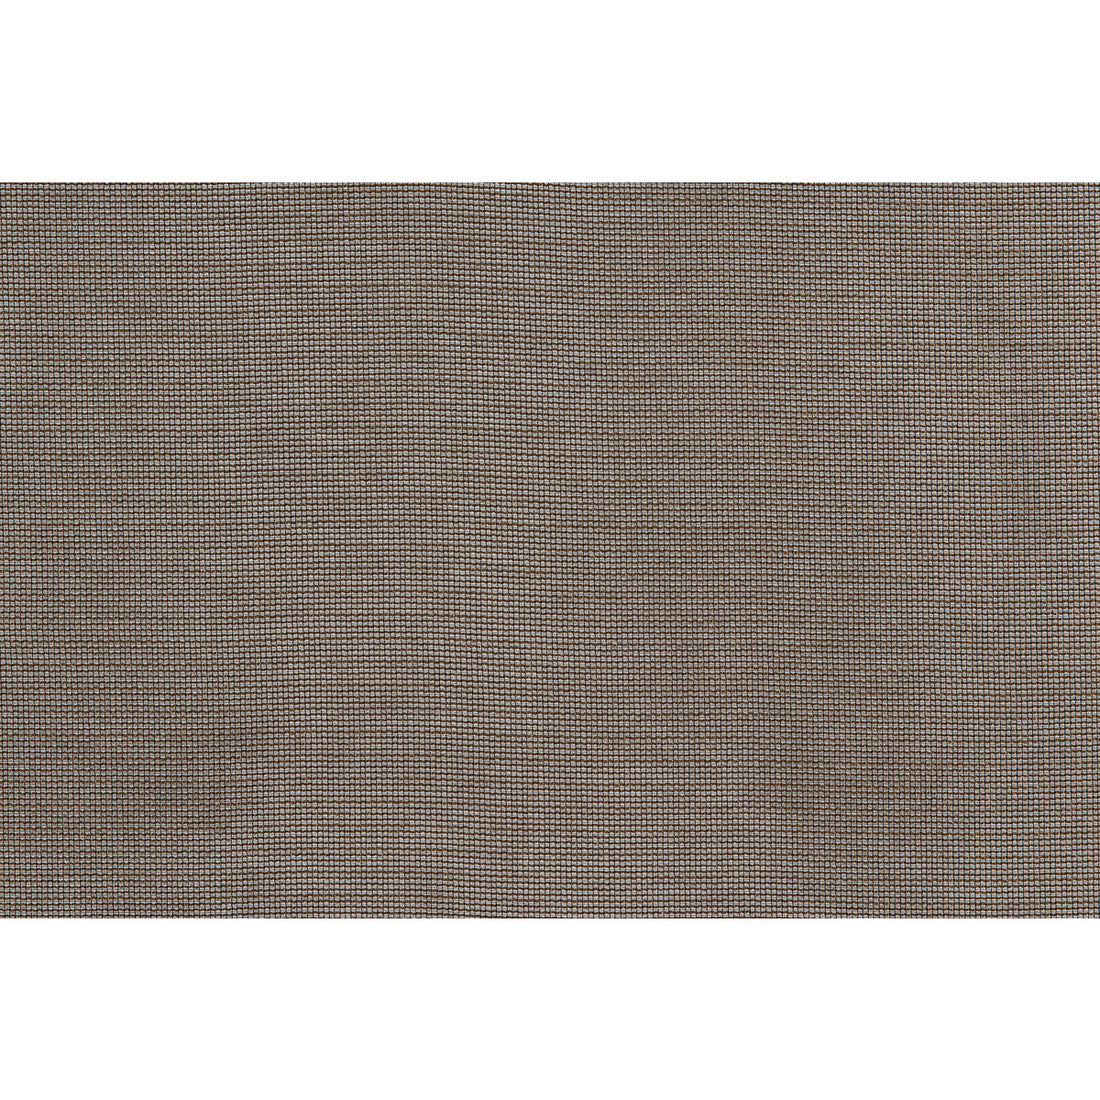 Hedy fabric in twig color - pattern 4289.6.0 - by Kravet Contract